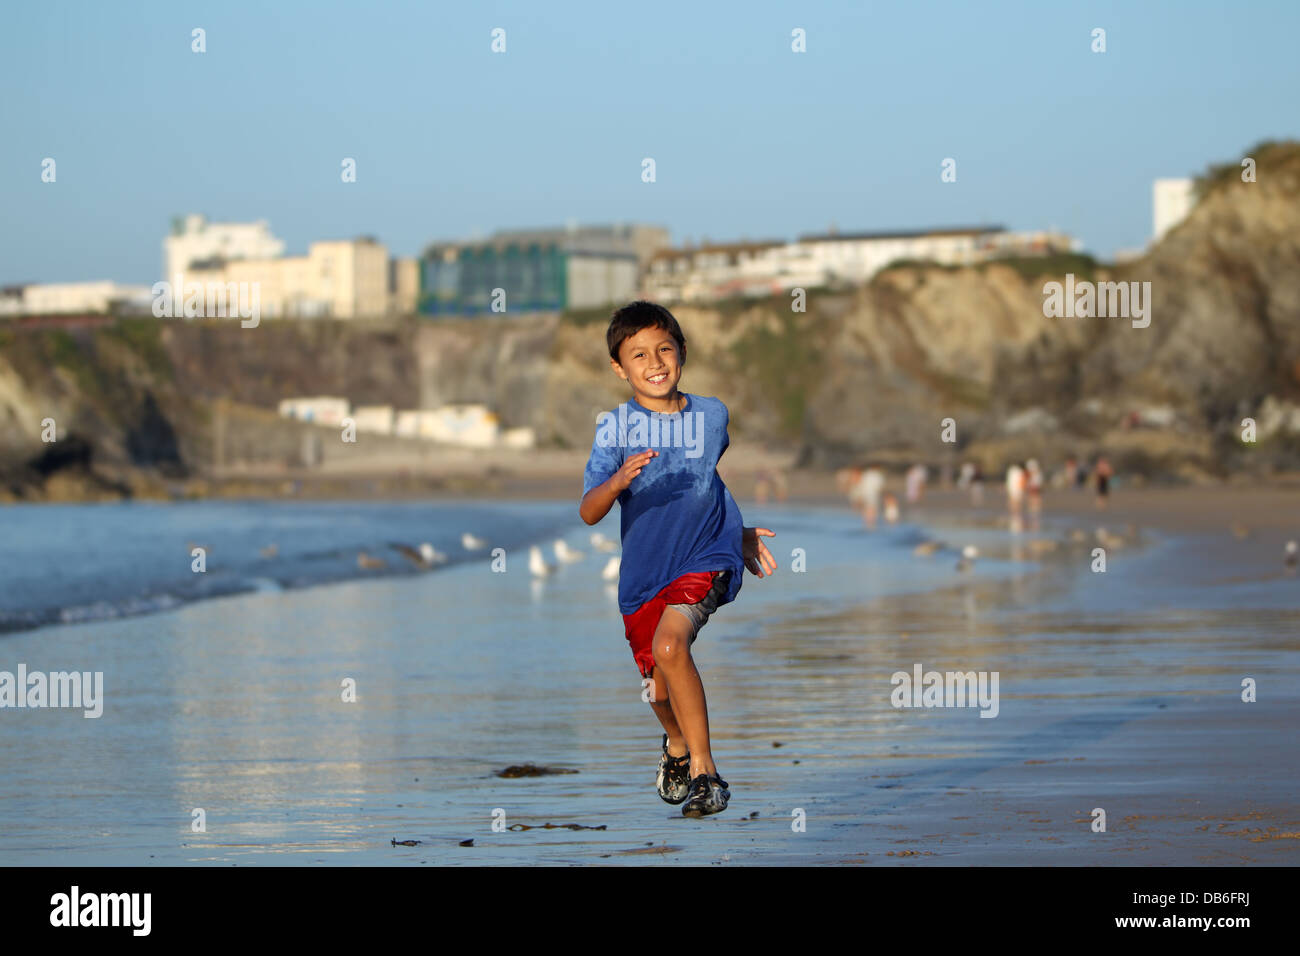 Young boy plays and runs in the surf along an English beach near sunset Stock Photo